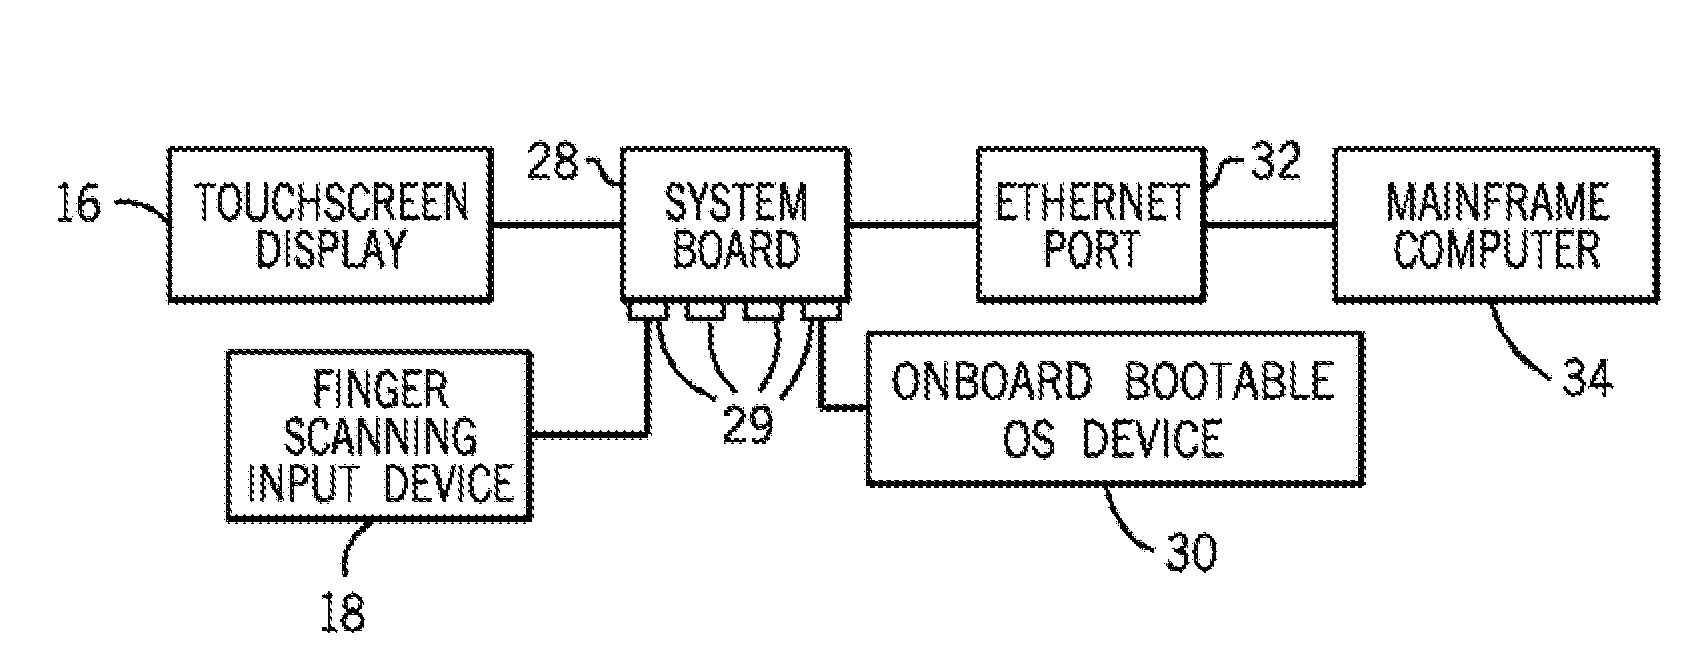 Electronic Voting Terminal and Voting System